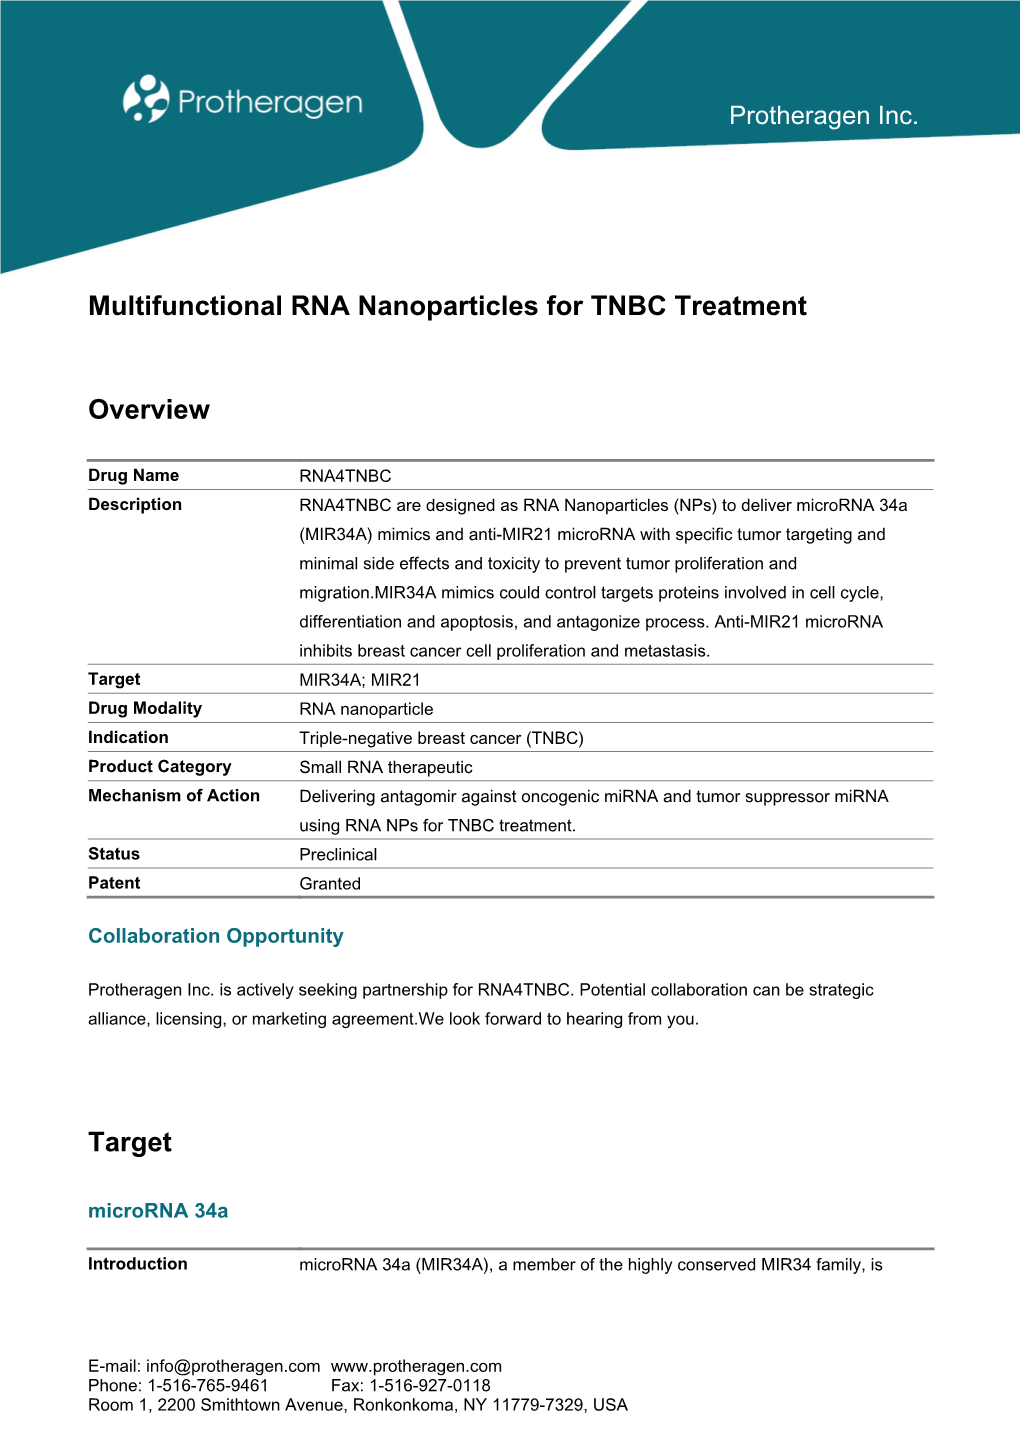 Multifunctional RNA Nanoparticles for TNBC Treatment